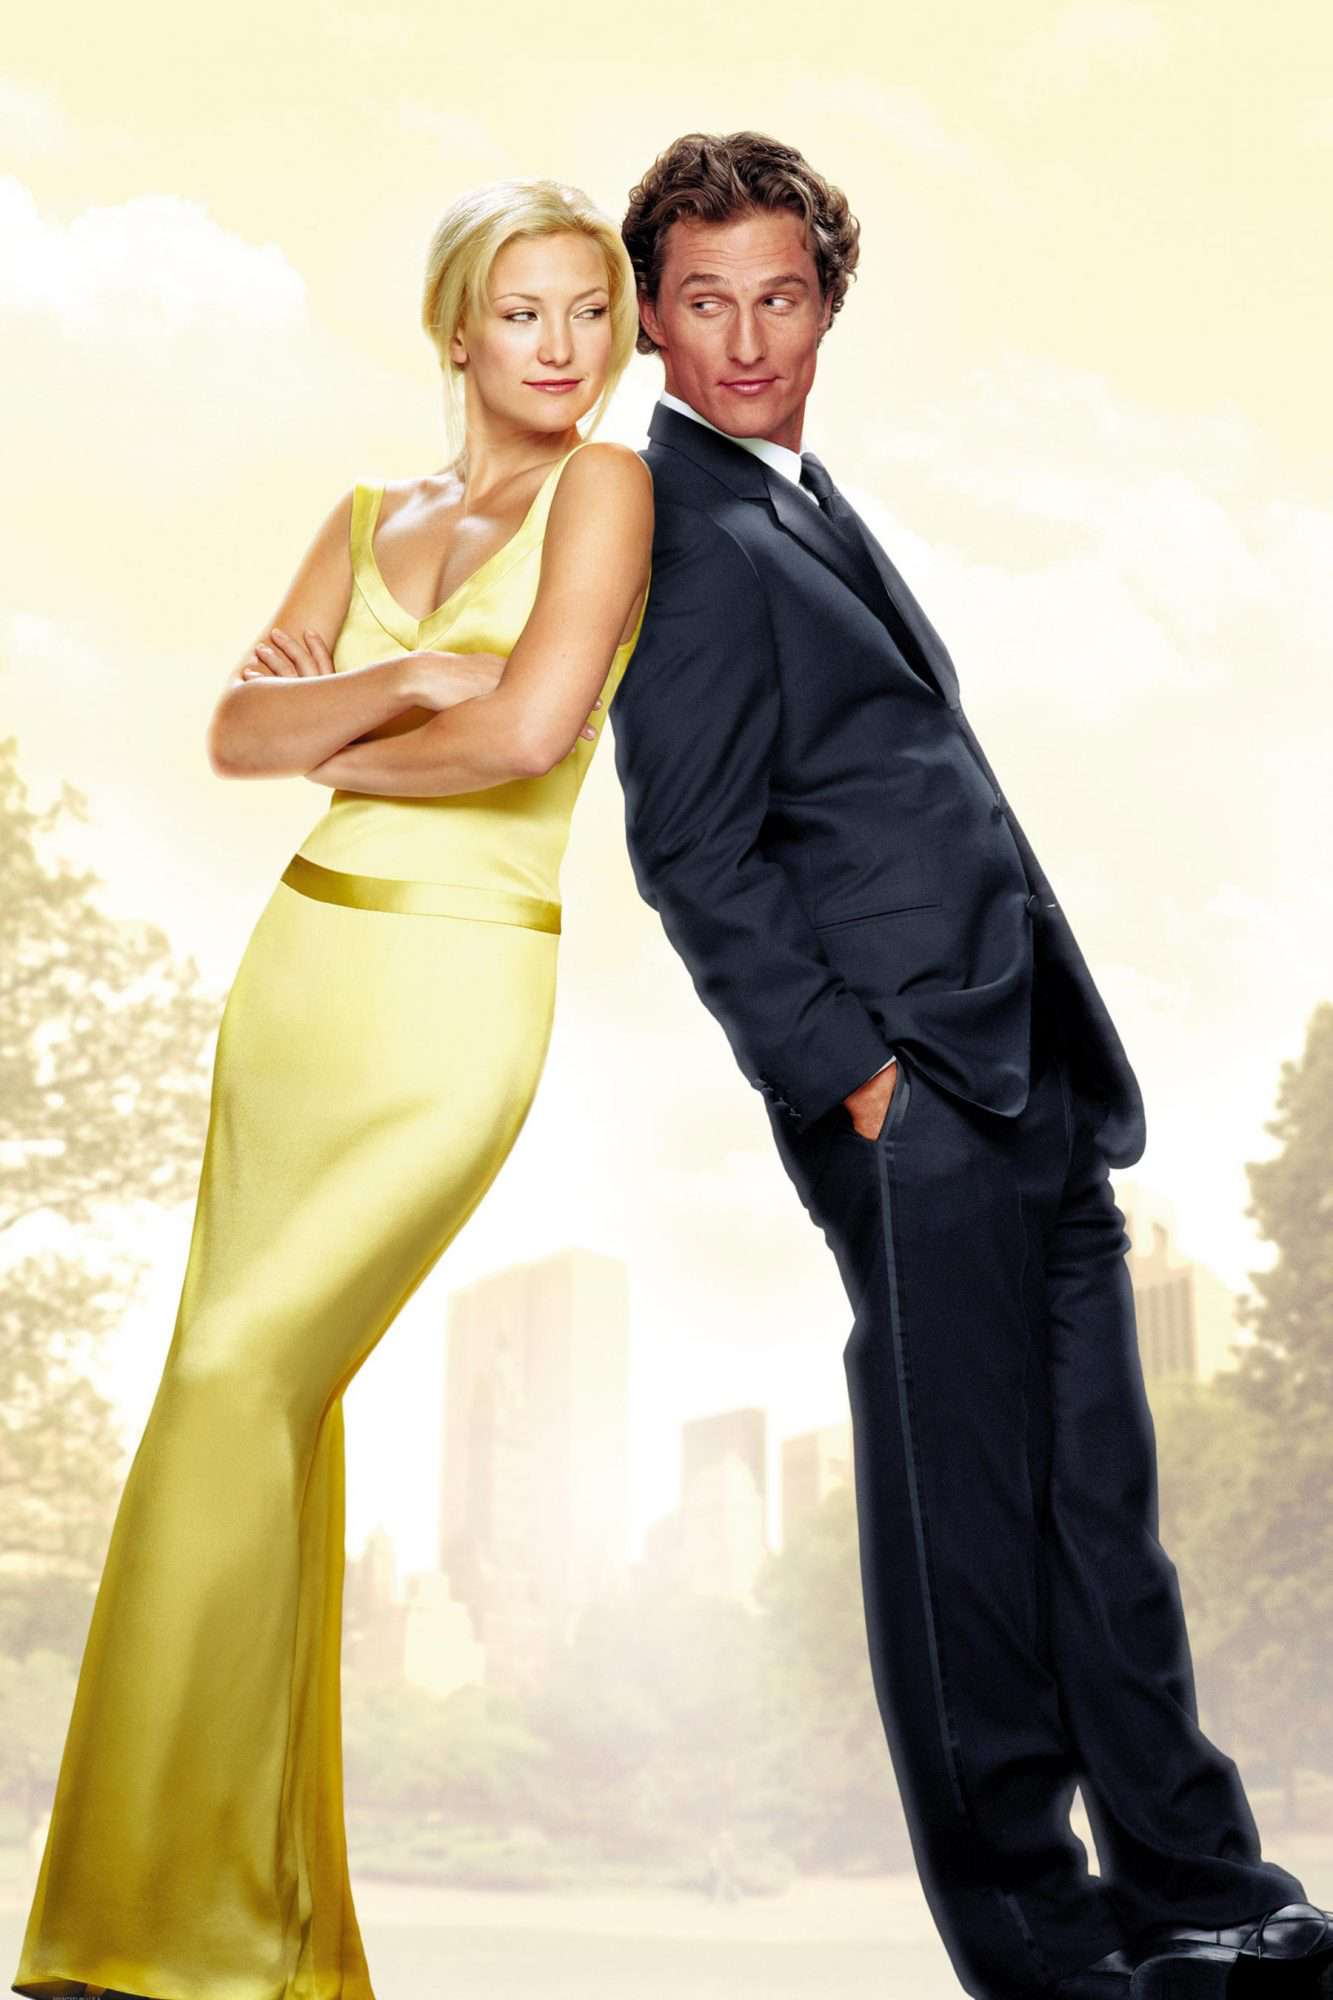 HOW TO LOSE A GUY IN 10 DAYS, Kate Hudson, Matthew McConaughey, 2003, (c) Paramount/courtesy Everett